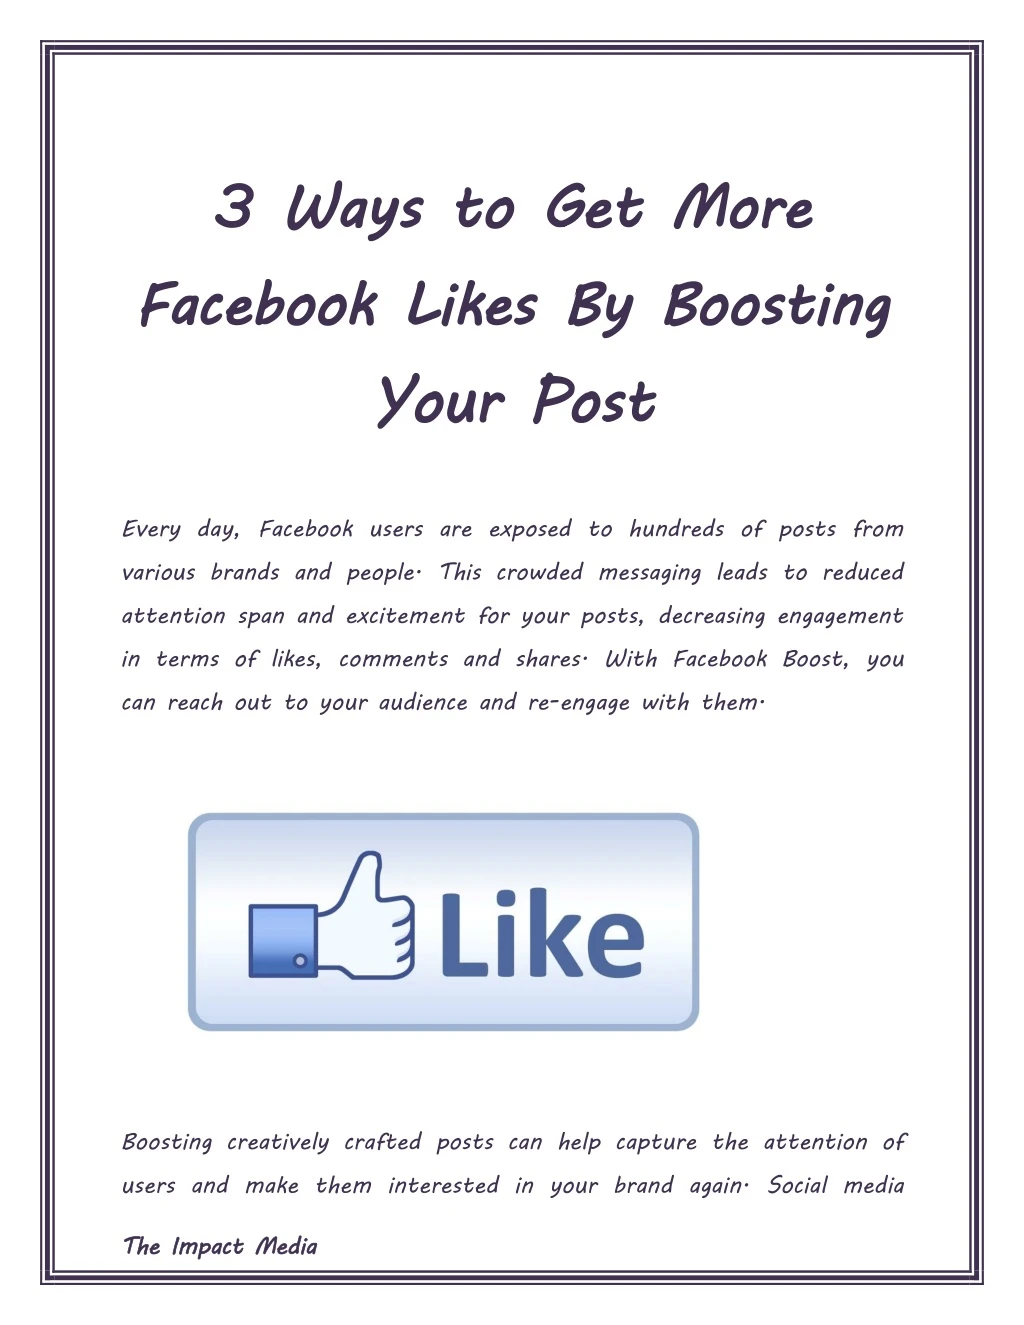 3 ways to get more facebook likes by boosting